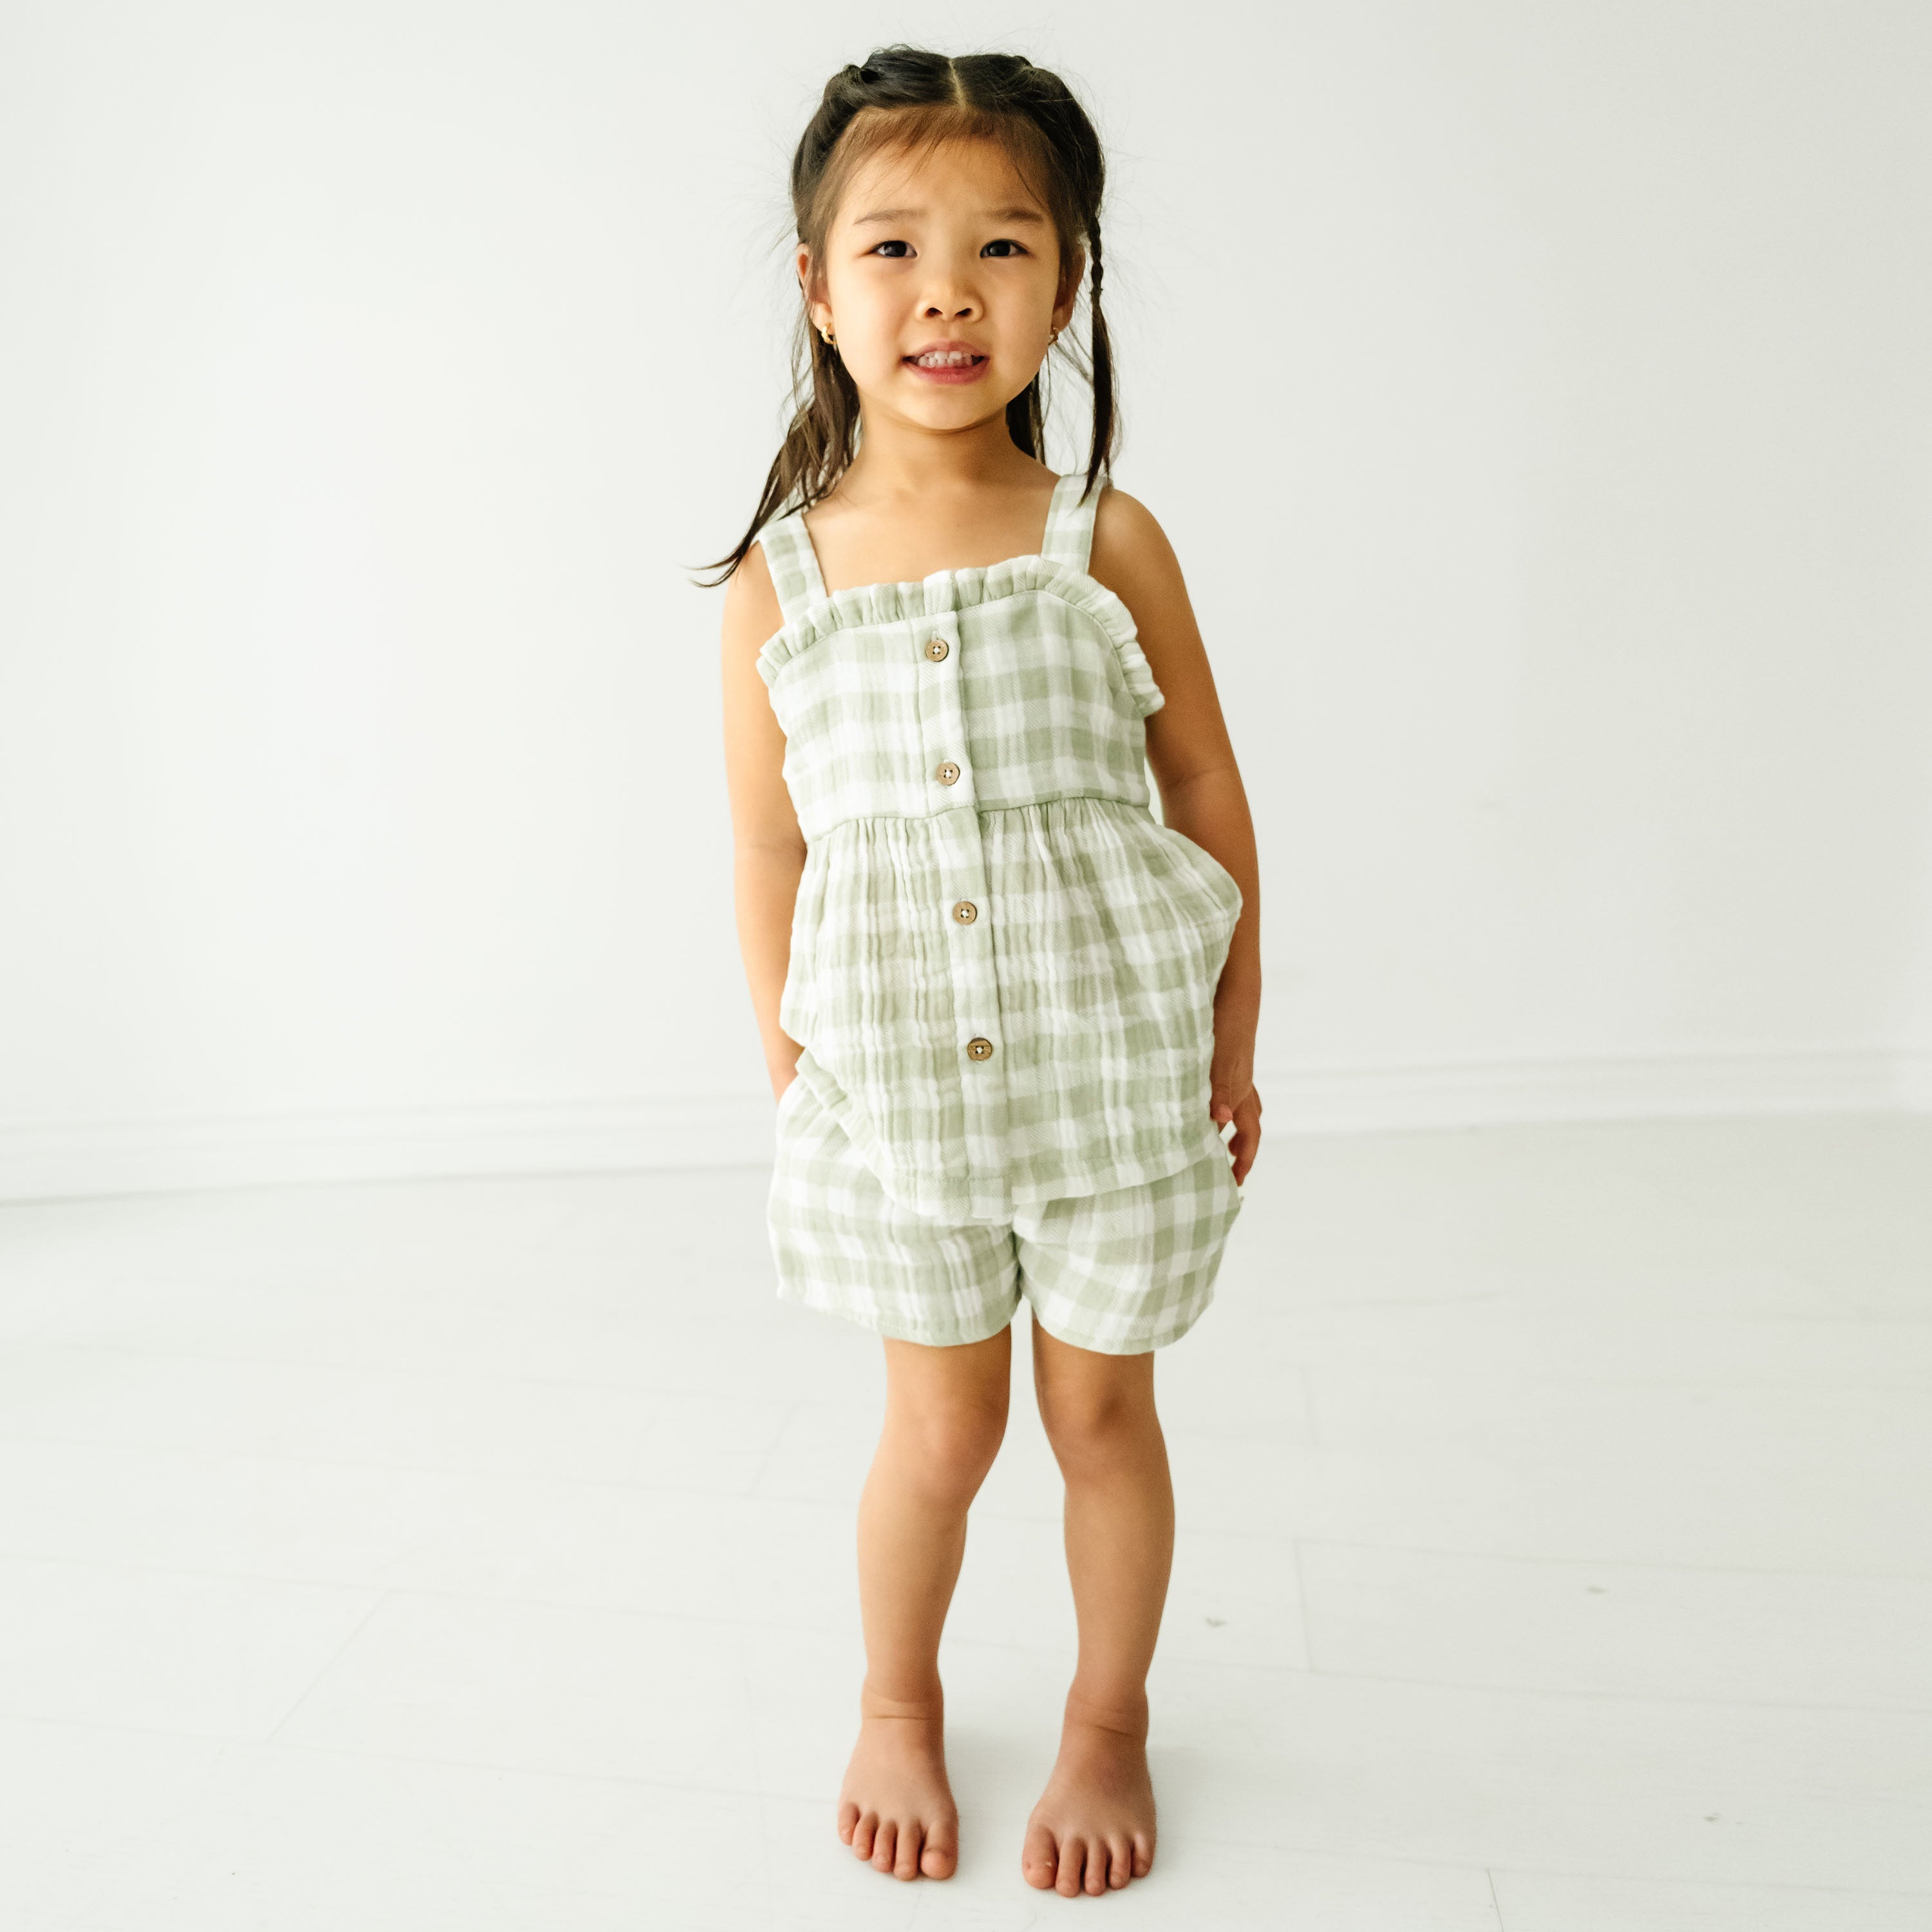 A young boy standing in a bright room, wearing a Makemake Organics Organic Muslin Peplum Top and Shorts Set - Gingham, smiling gently at the camera.